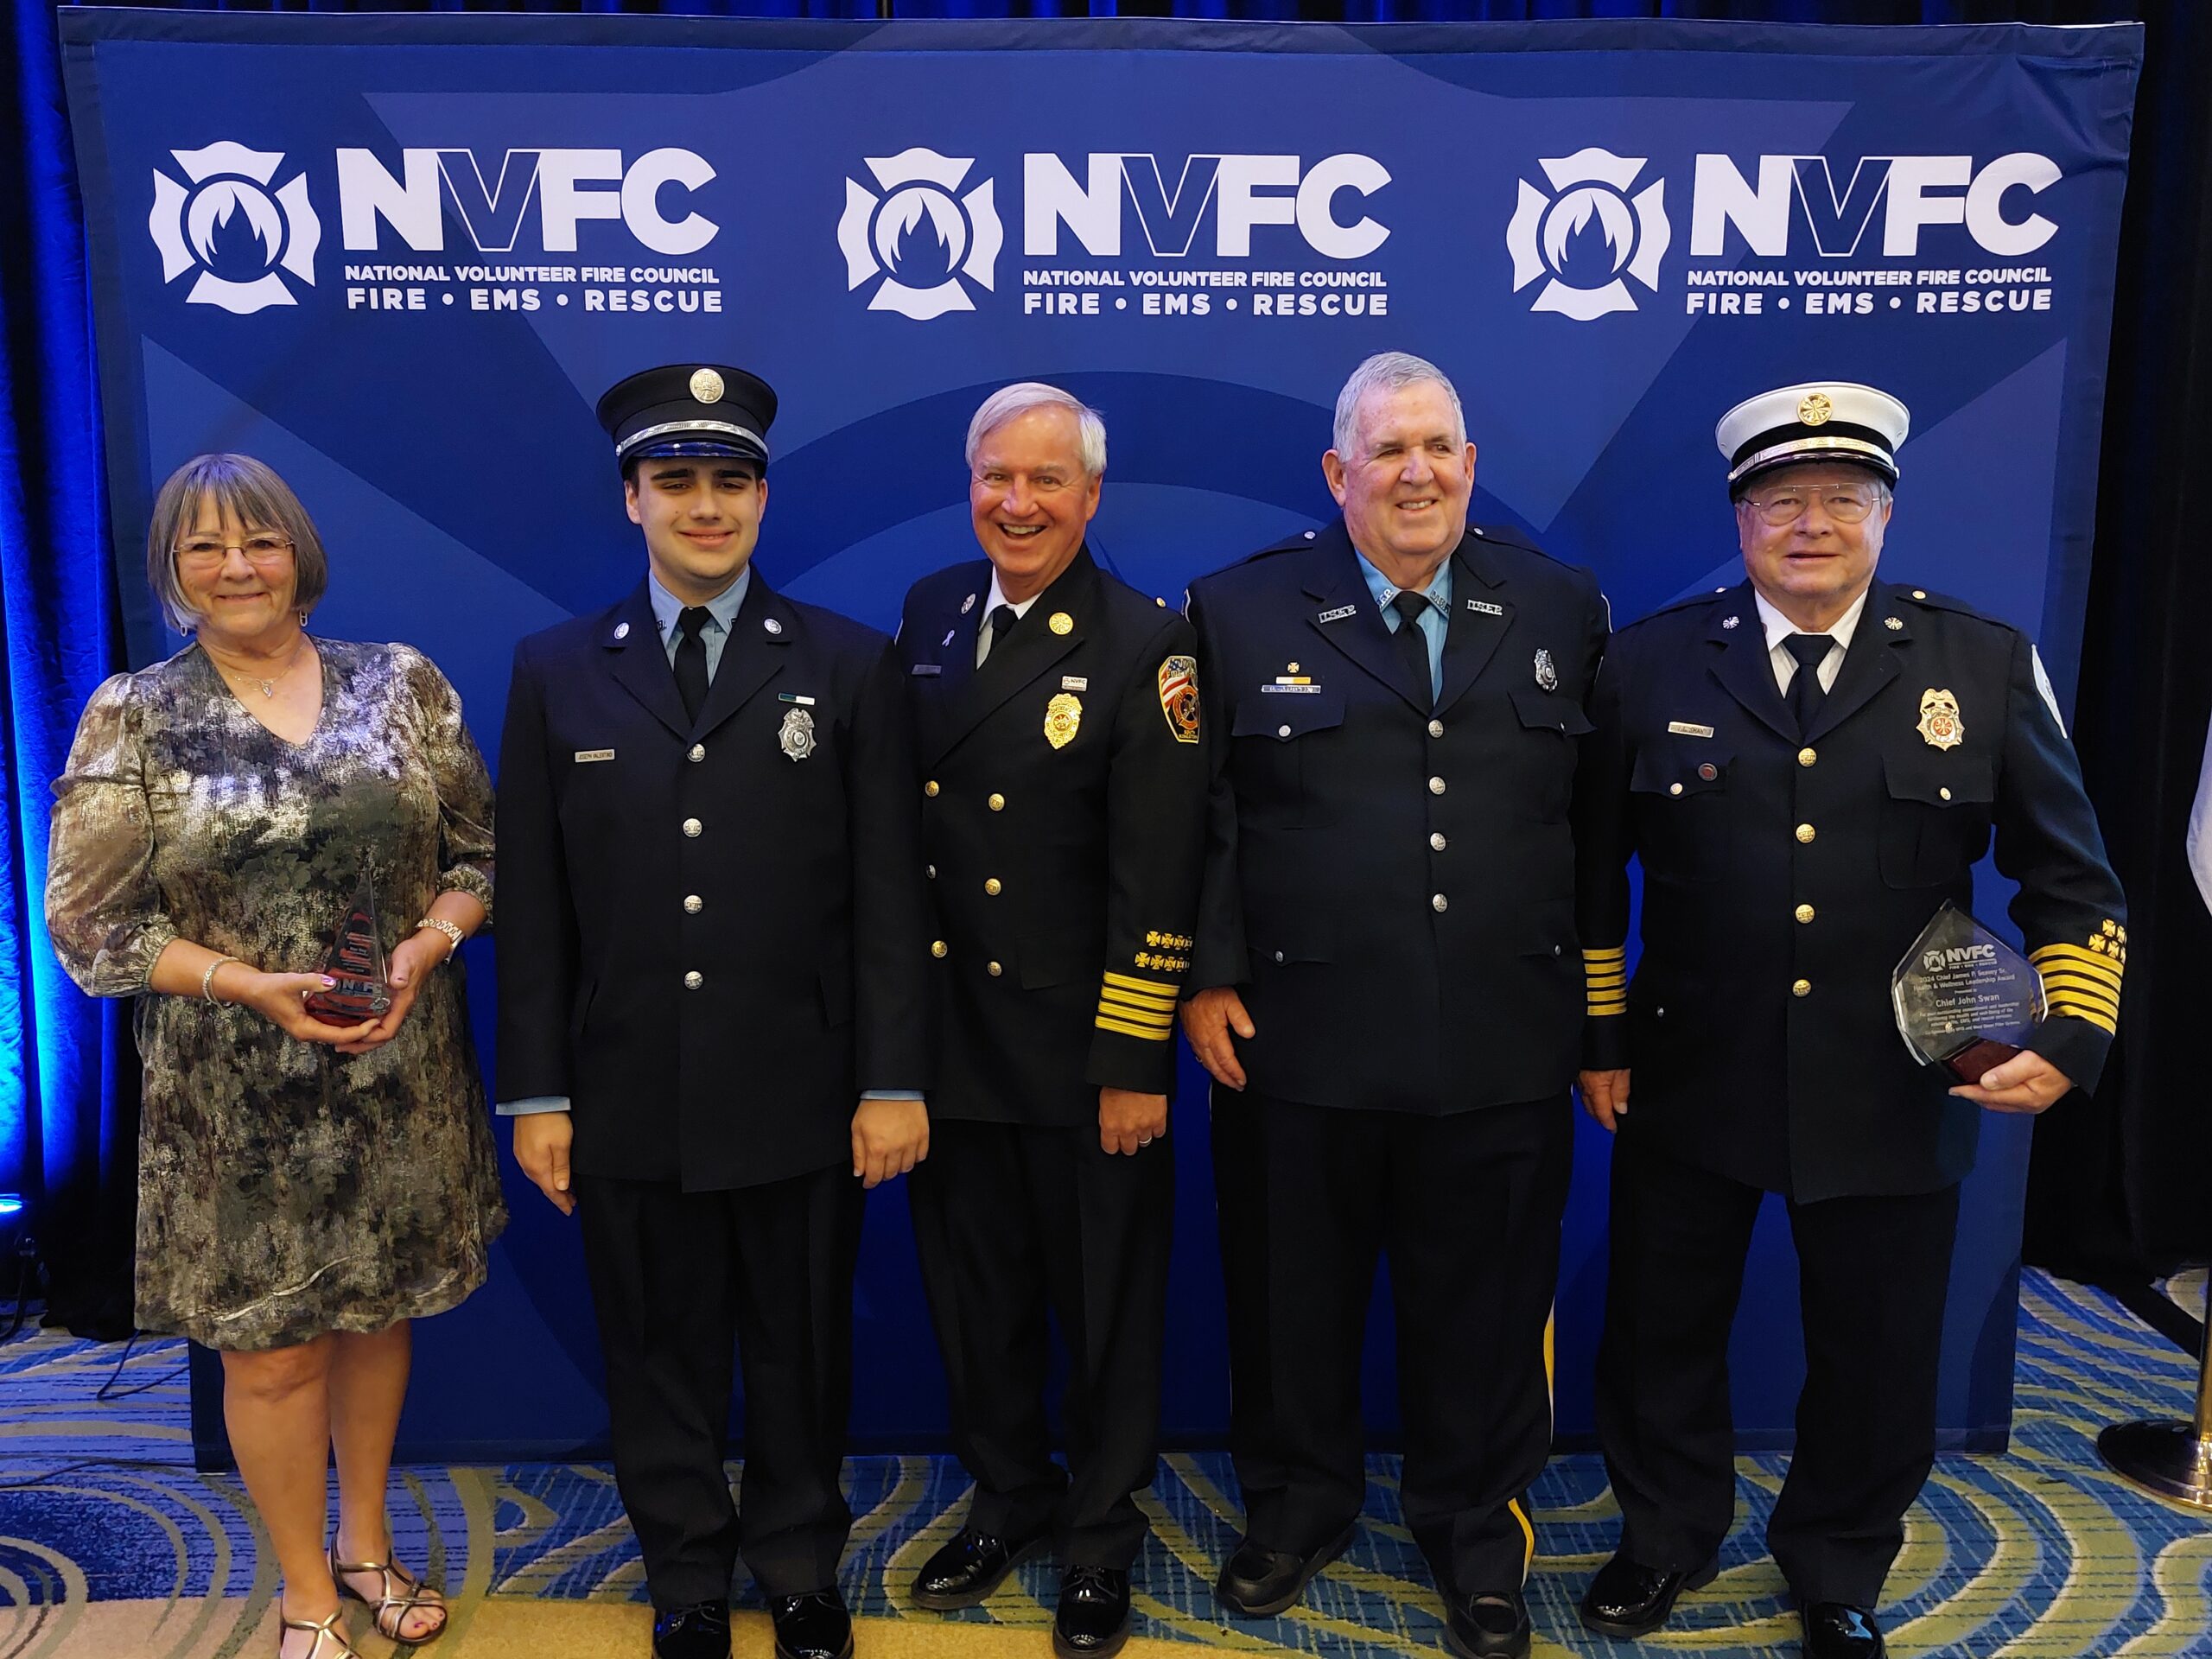 Award winners posed in front of NVFC backdrop